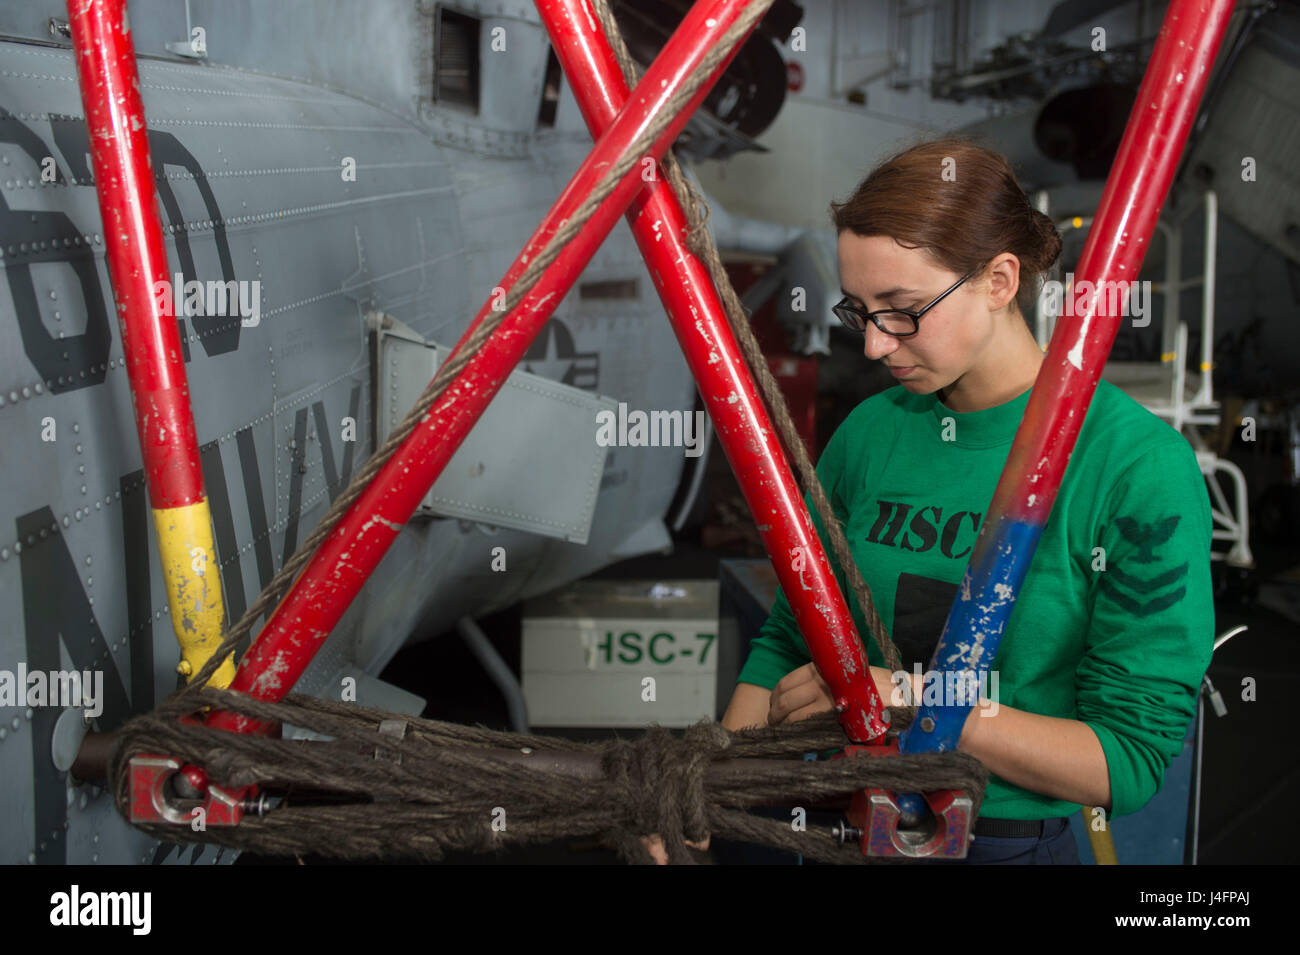 160704-N-WC455-056  MEDITERRANEAN SEA (July 4, 2016) – Aviation Structural Mechanic 2nd Class Jennifer Cartwright clamps the rotor blades of an MH-60S Sea Hawk assigned to the Dusty Dogs of Helicopter Sea Combat Squadron (HSC) 7 in the hangar bay of the aircraft carrier USS Dwight D. Eisenhower (CVN 69) (Ike). Ike is deployed in support of Operation Inherent Resolve, maritime security operations and theater security operation efforts in the U.S. 6th Fleet area of operations. (U.S. Navy photo by Mass Communication Specialist Seaman Apprentice Joshua Murray/Released) Stock Photo